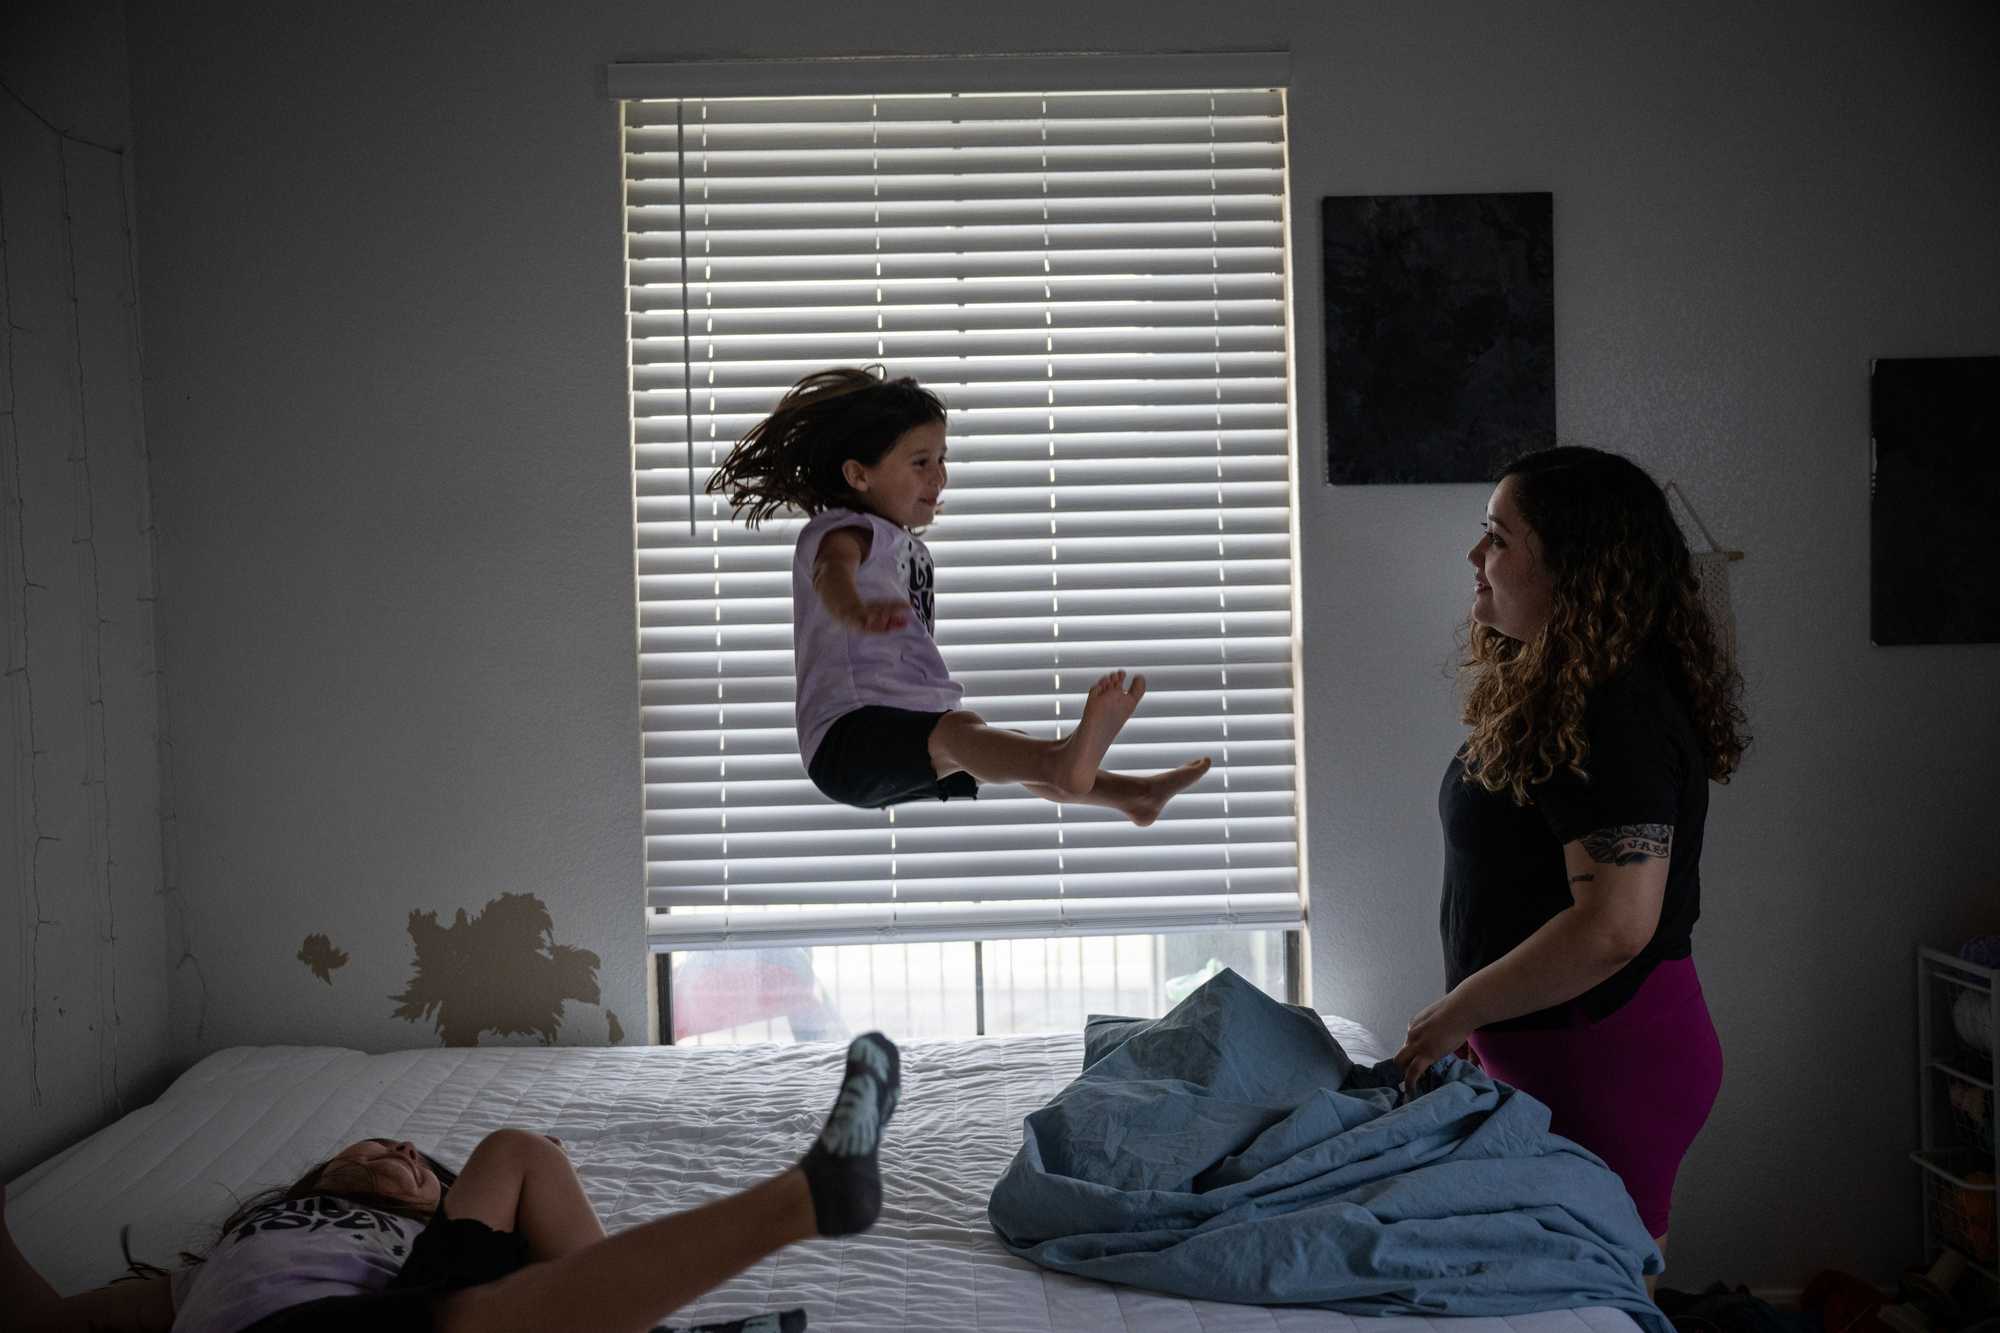 Osuna played with her daughters Maliah (left) and Jae as she changed the sheets on her bed. (Tamir Kalifa for The Boston Globe)